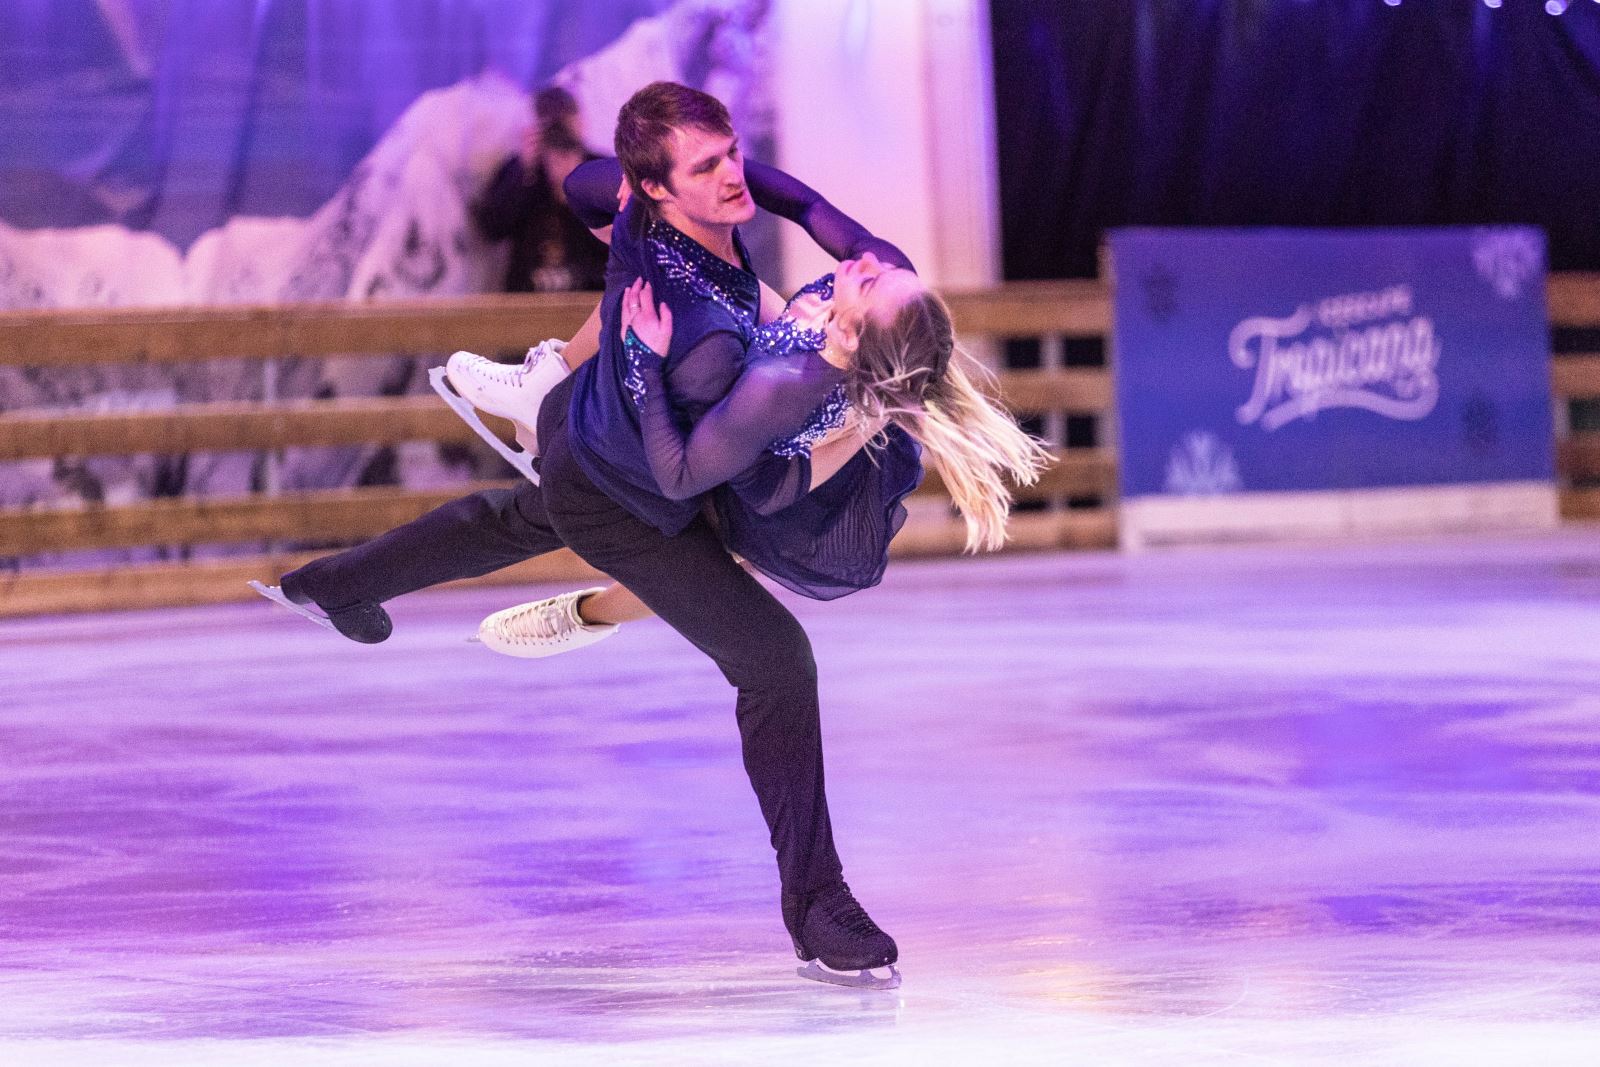 A female ice dancer being lifted by her male partner